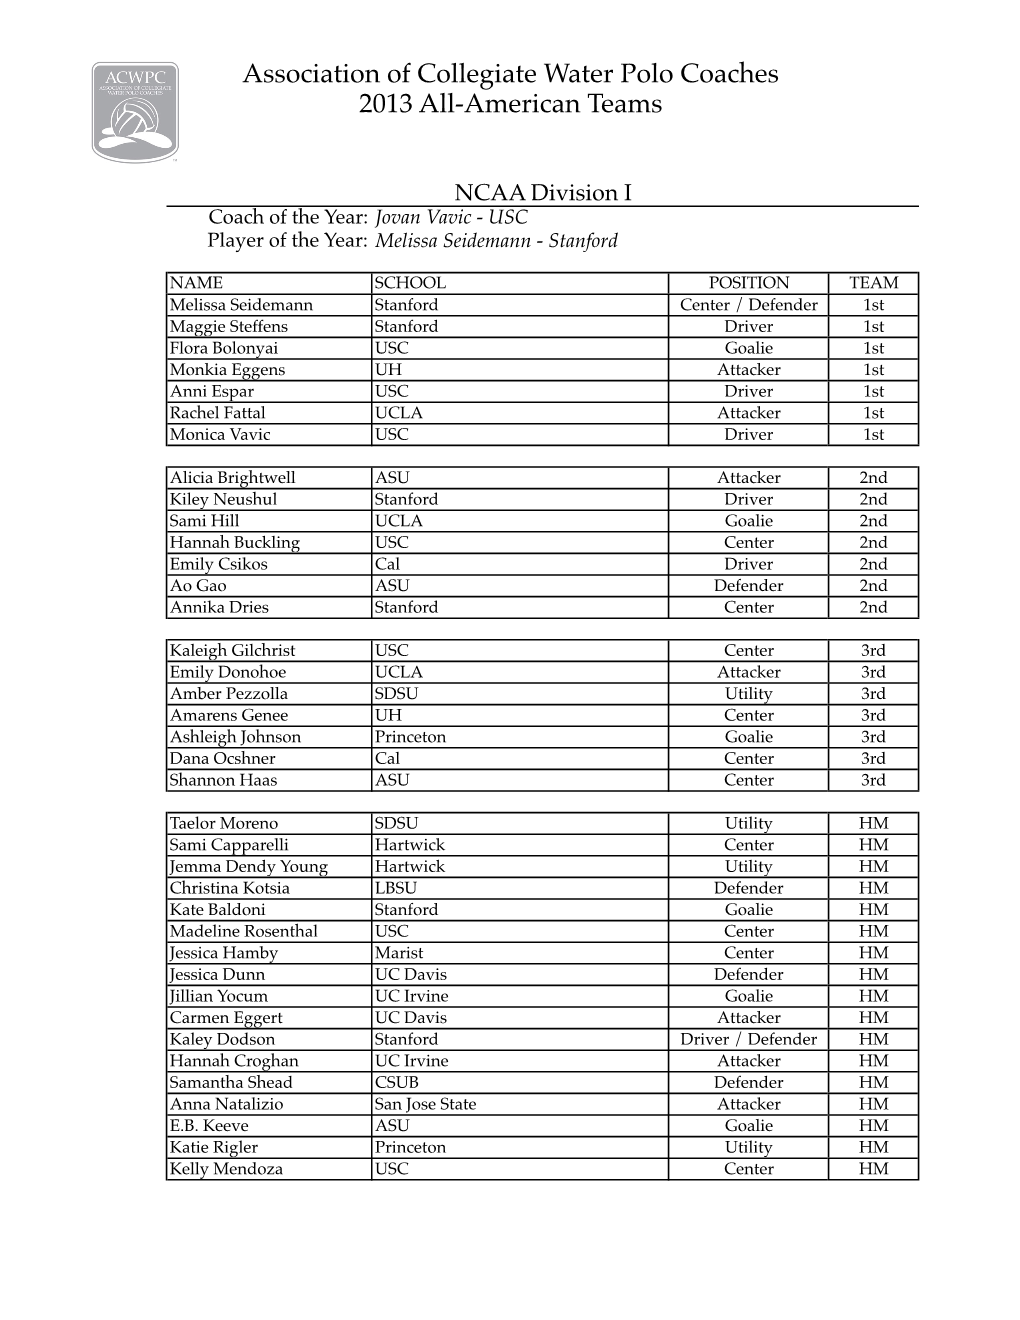 Association of Collegiate Water Polo Coaches 2013 All-American Teams